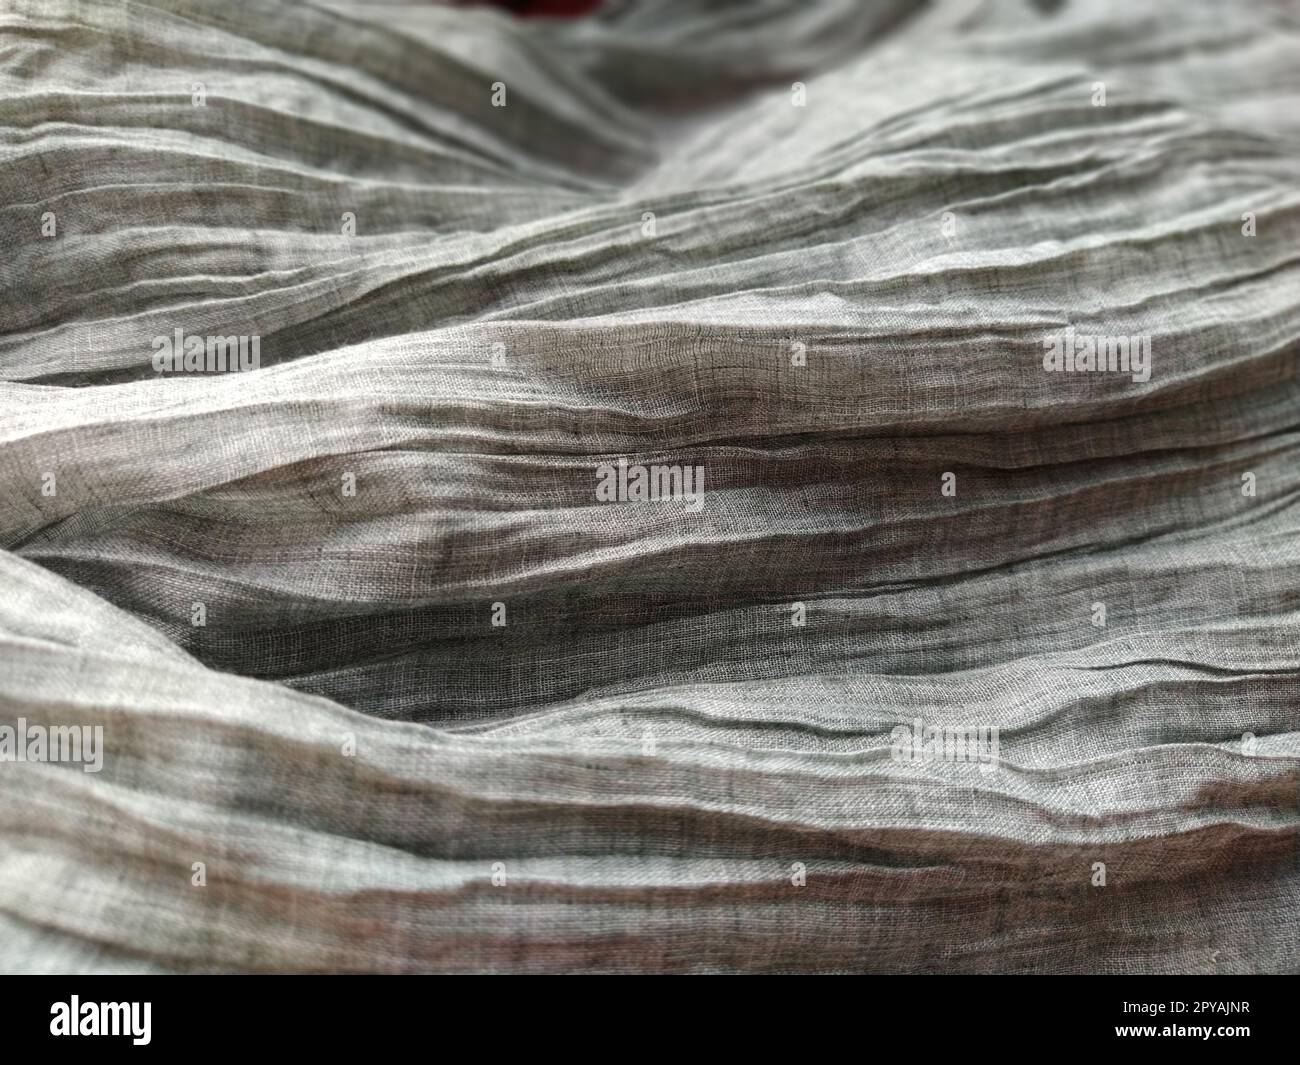 Fabric sheer curtain fabric. Beautiful gray color. The curtain material is carelessly folded and wrinkled. Fabric sample. Interior design option. Stock Photo